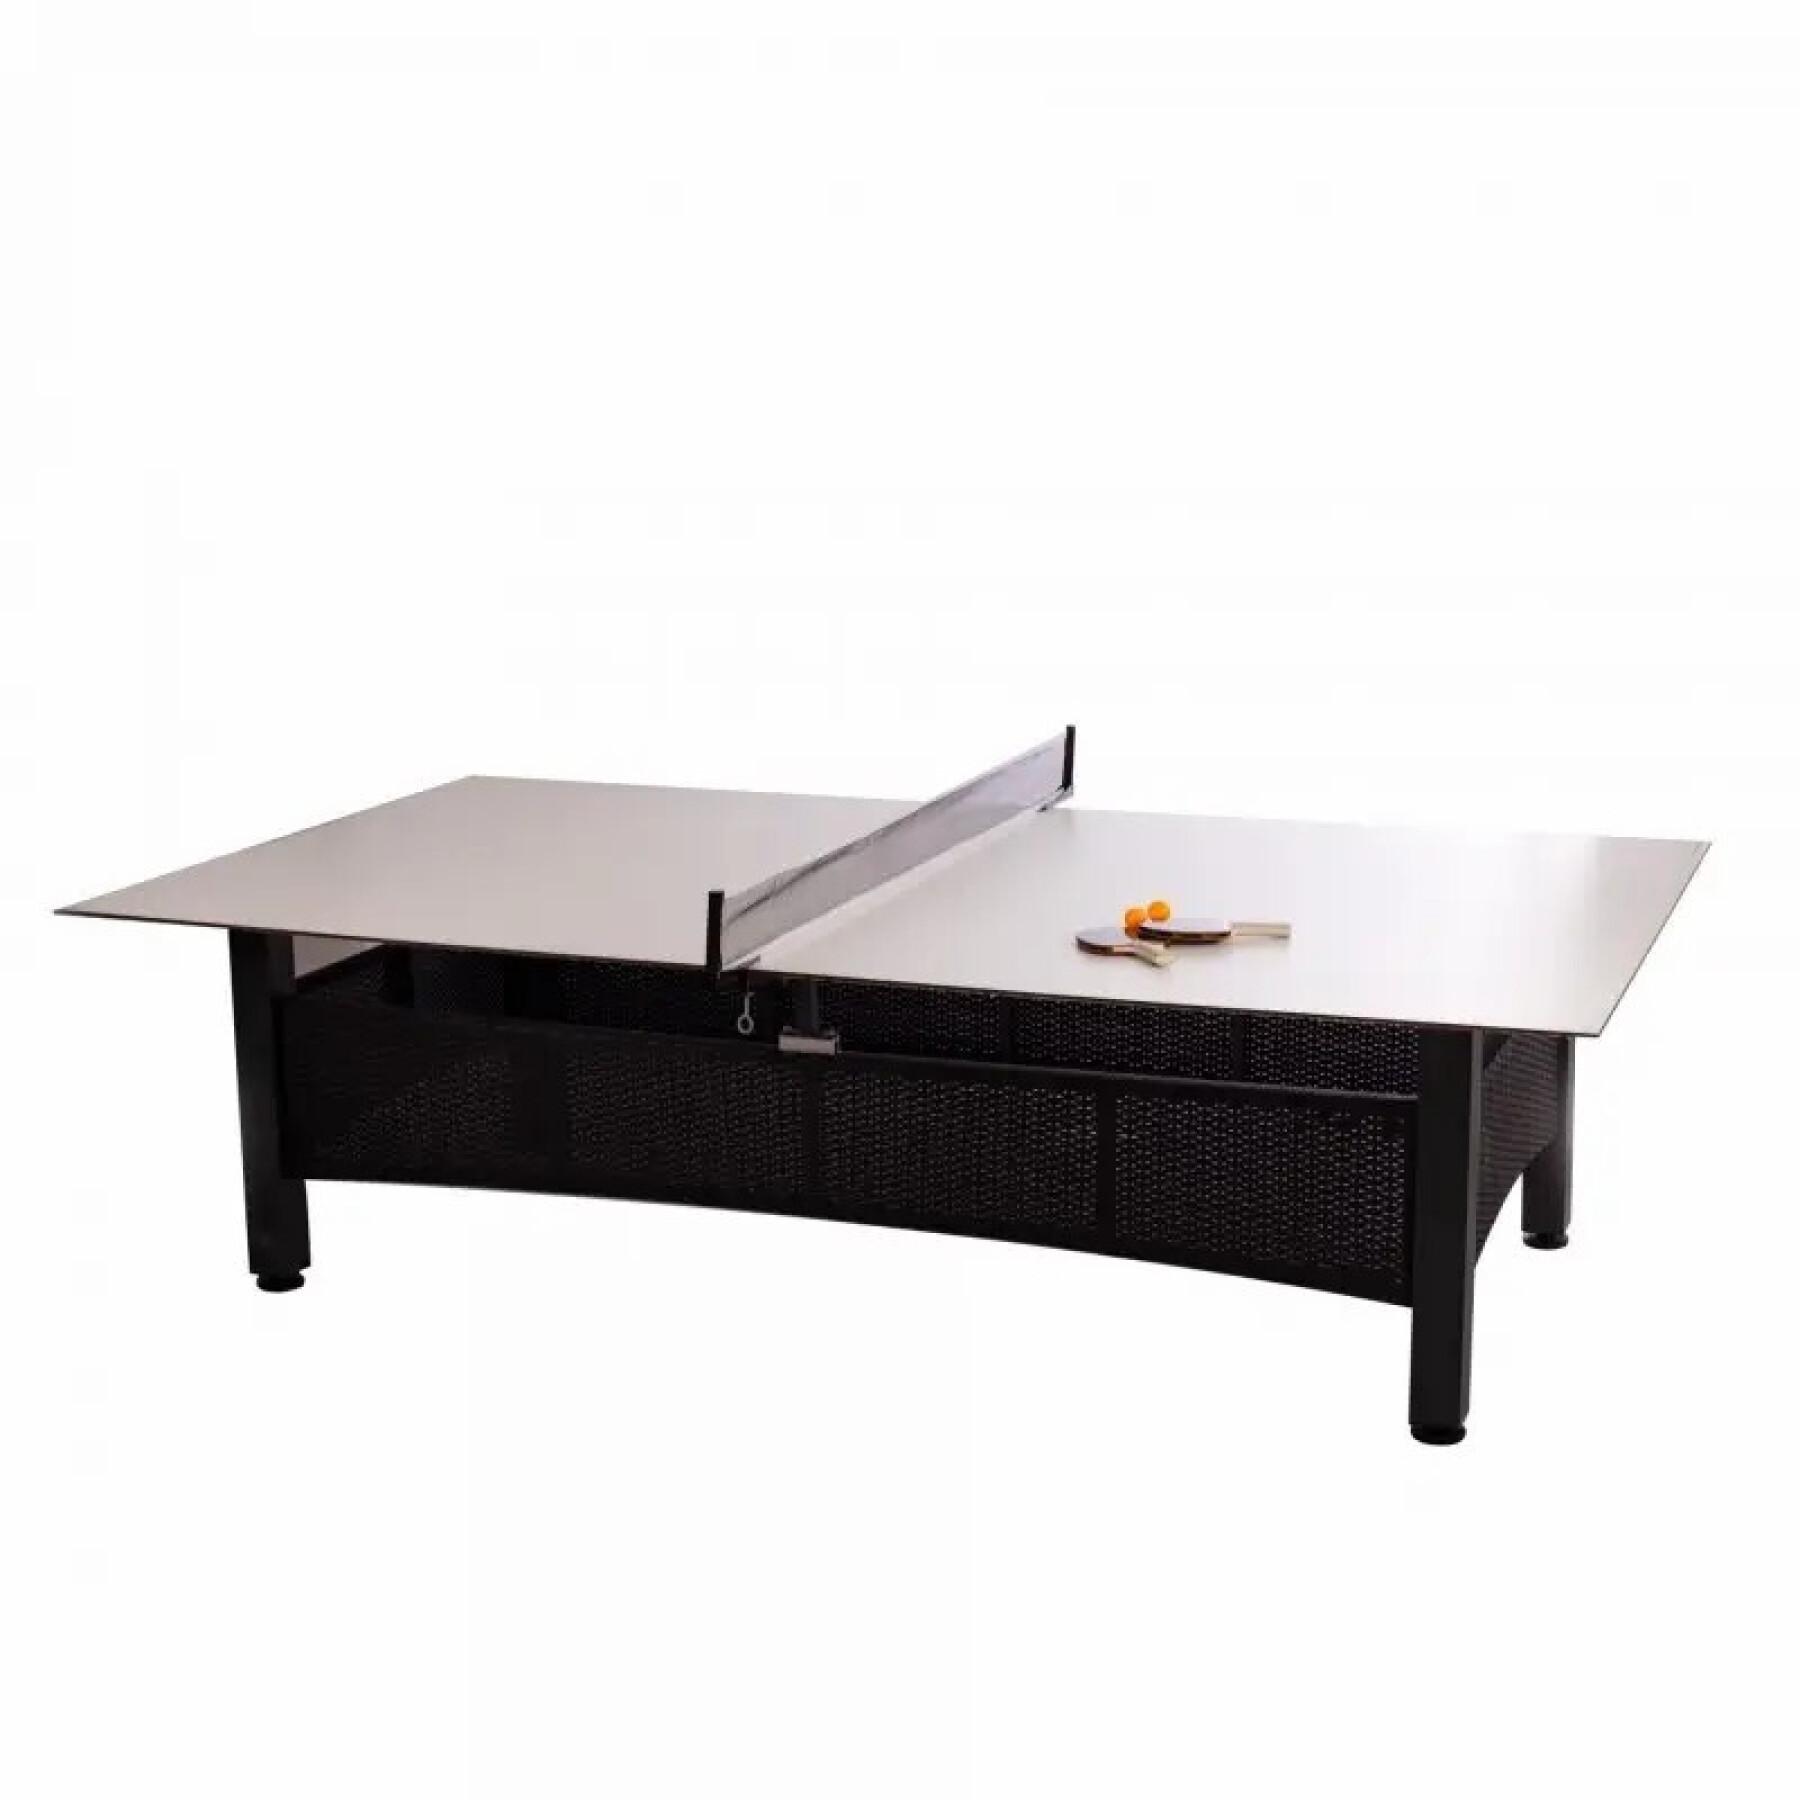 Outdoor table tennis table Softee Fenomel